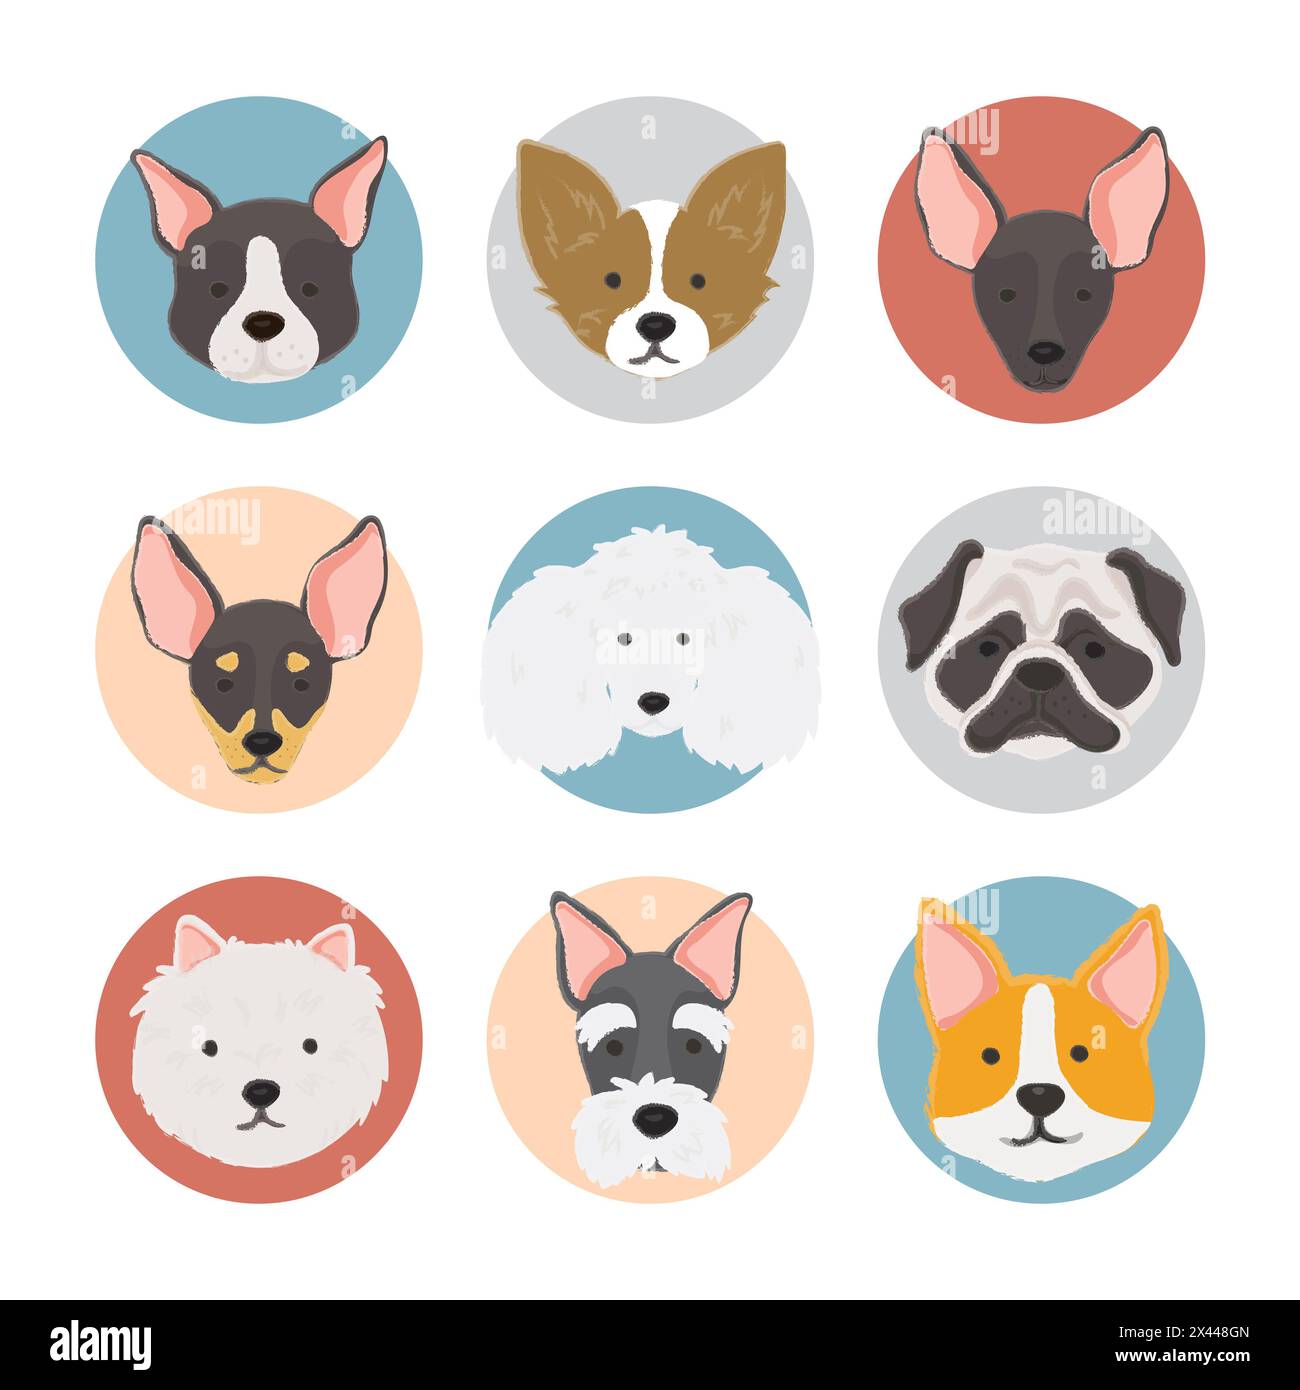 Illustration of dogs collection Stock Photo